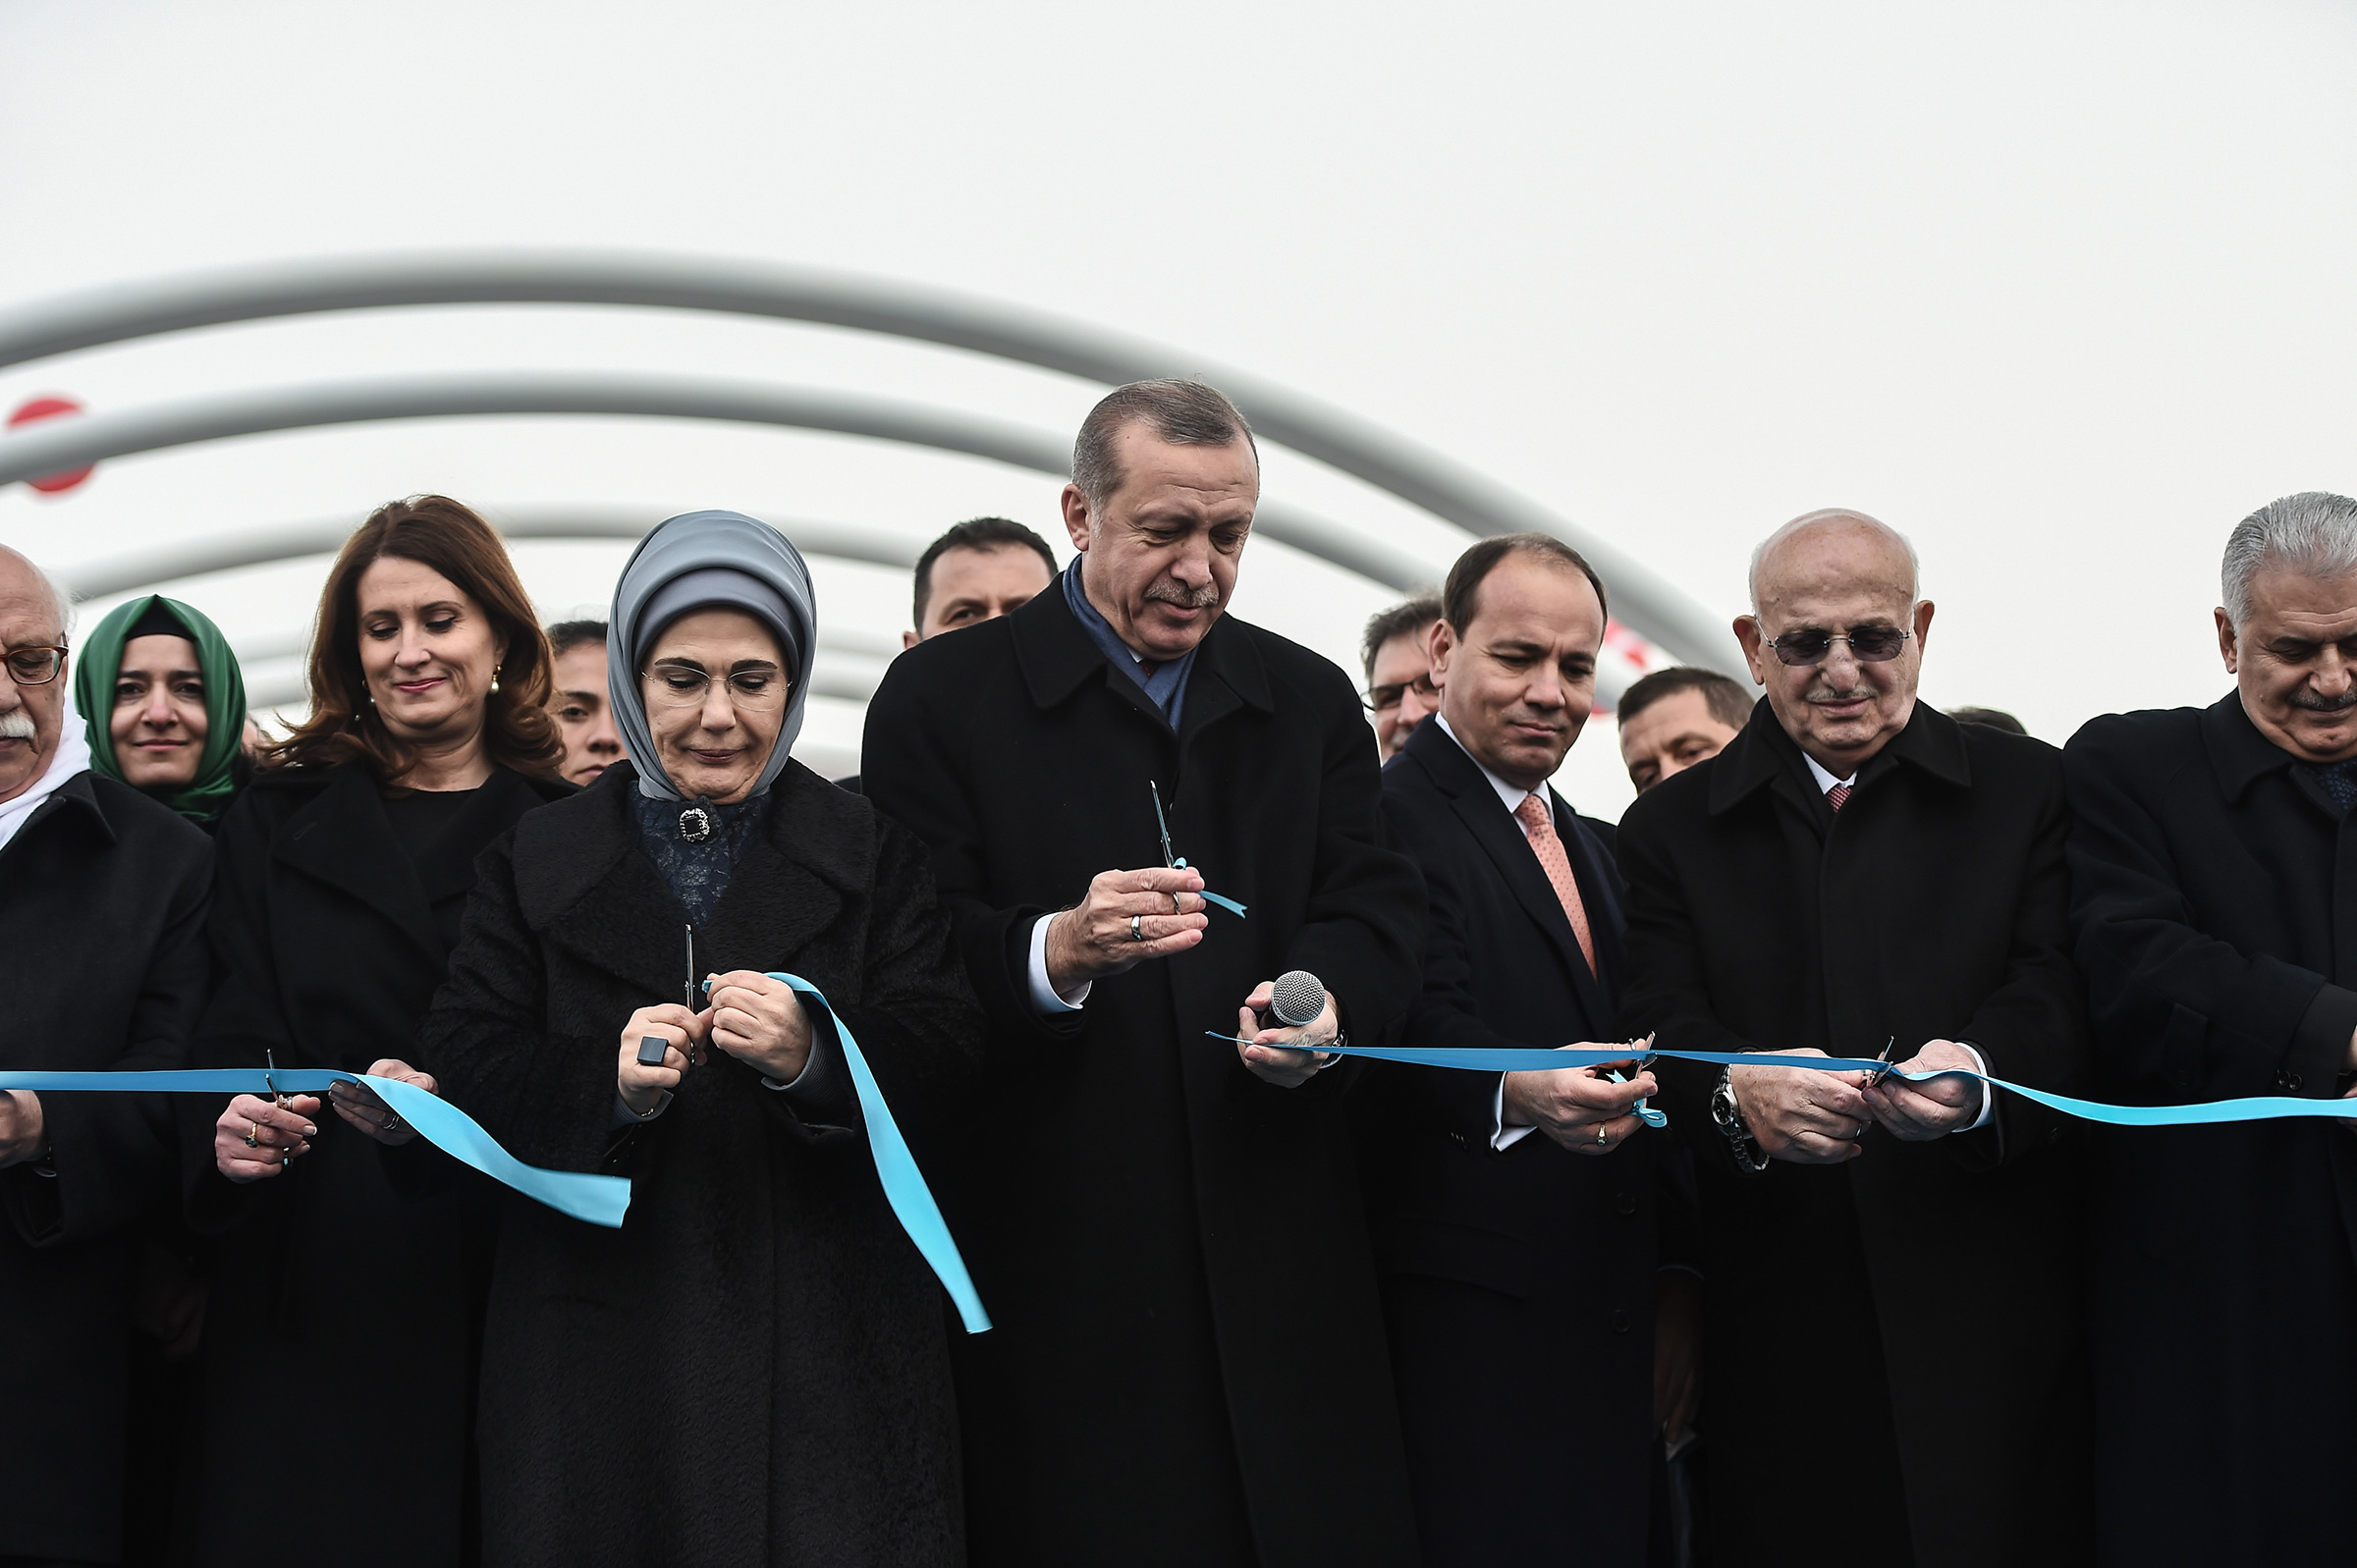 Turkish President Recep Tayyip Erdogan, center, with his wife Emine Erdogan by his side and Prime Minister Binali Yildirim, right, during the opening ceremony of a road tunnel underneath the Bosporus Strait in Istanbul in December 2016. (Ozan Kose—AFP/Getty Images)